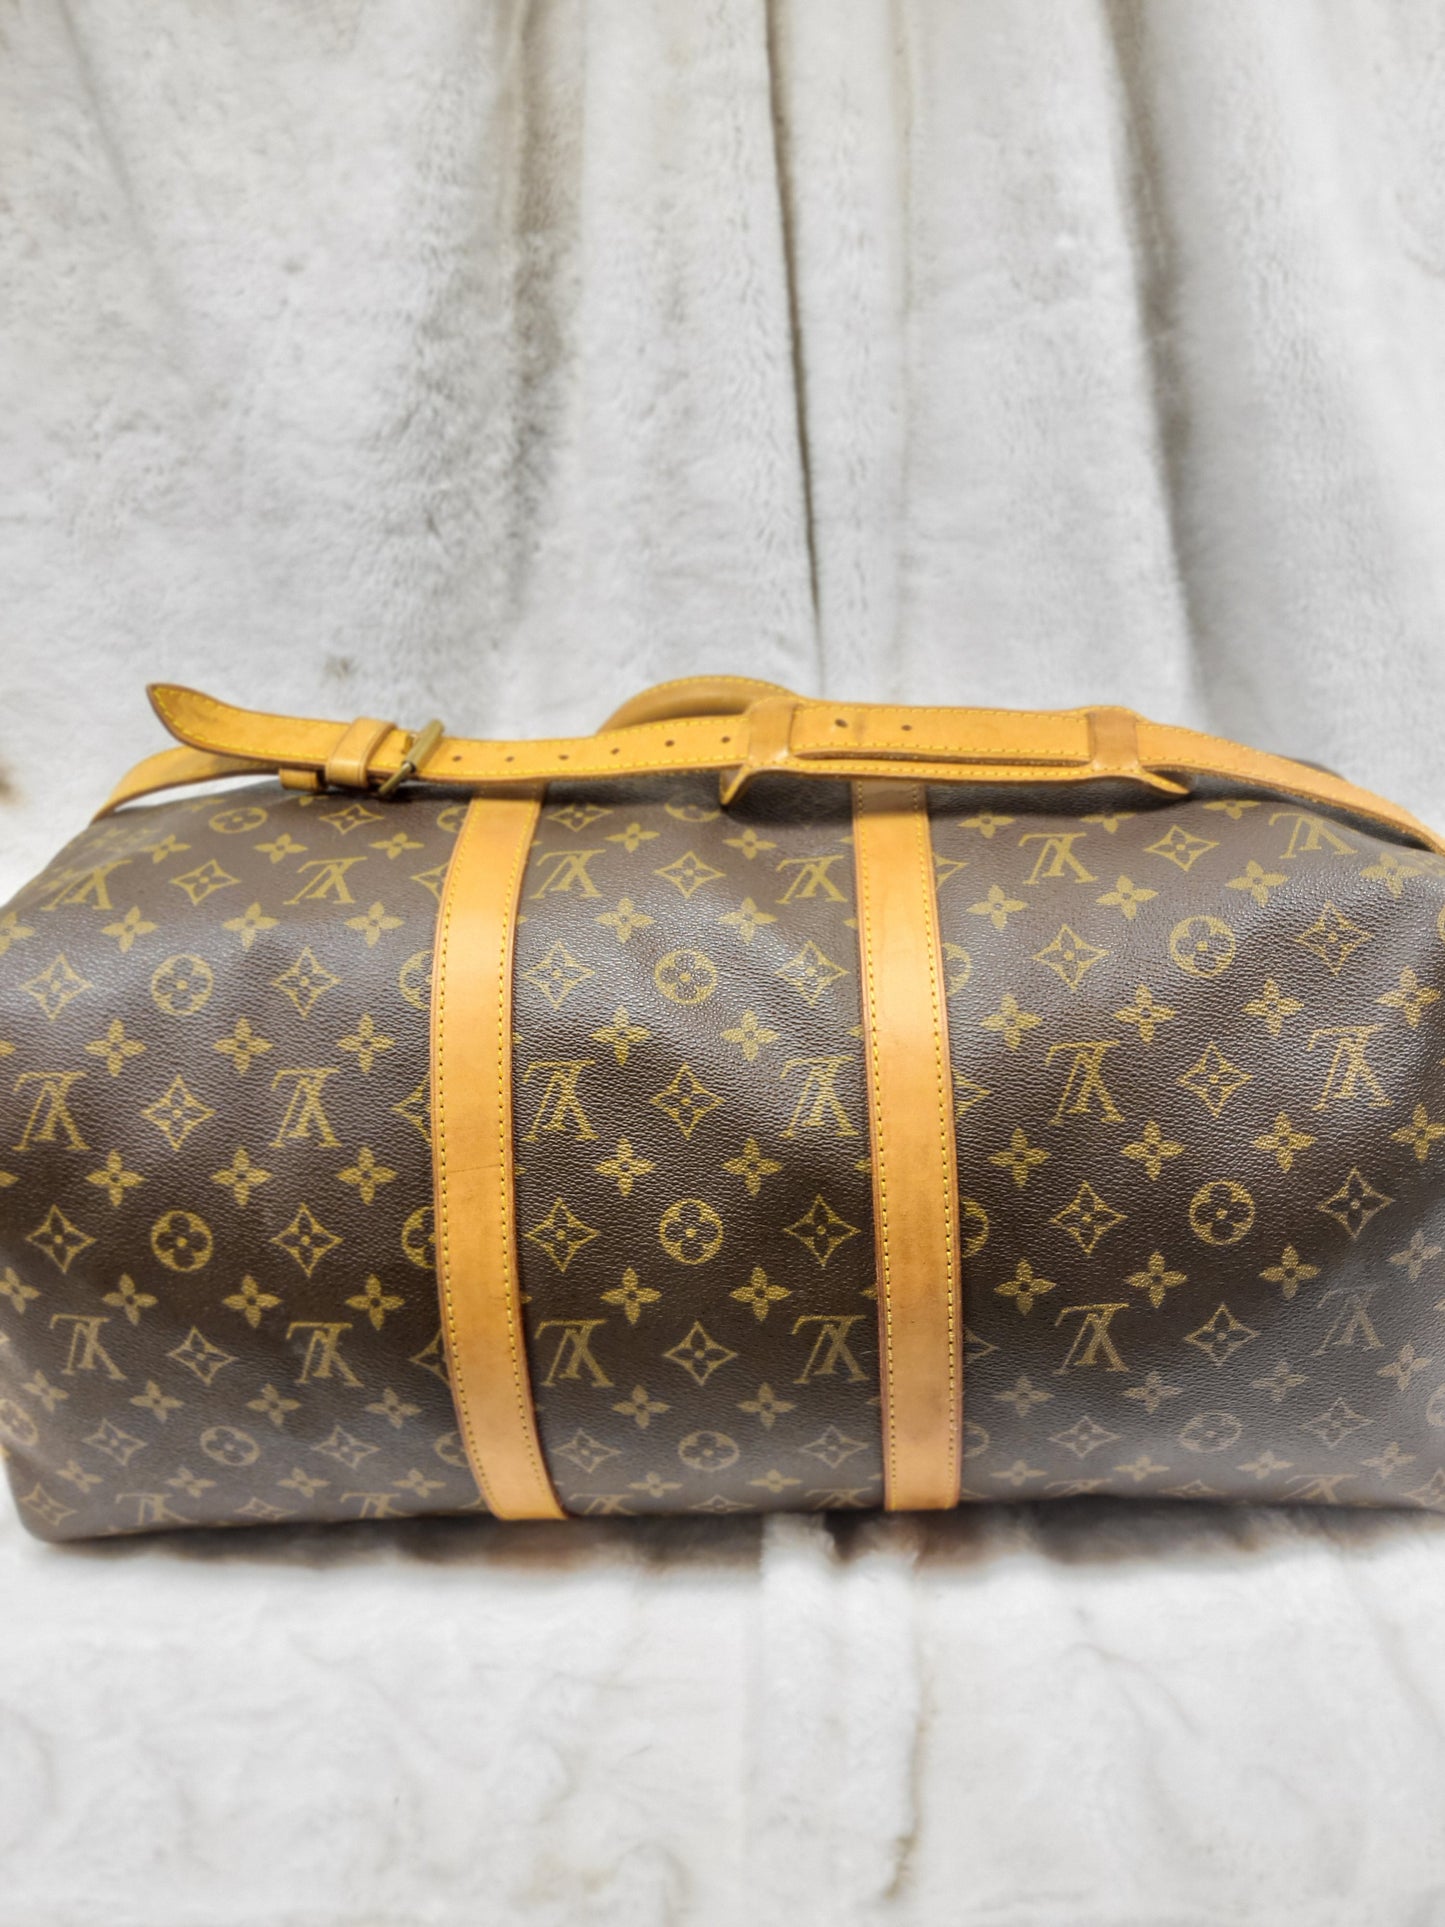 Authentic pre-owned Louis Vuitton Keepall 50 bandoliere travel duffel bag